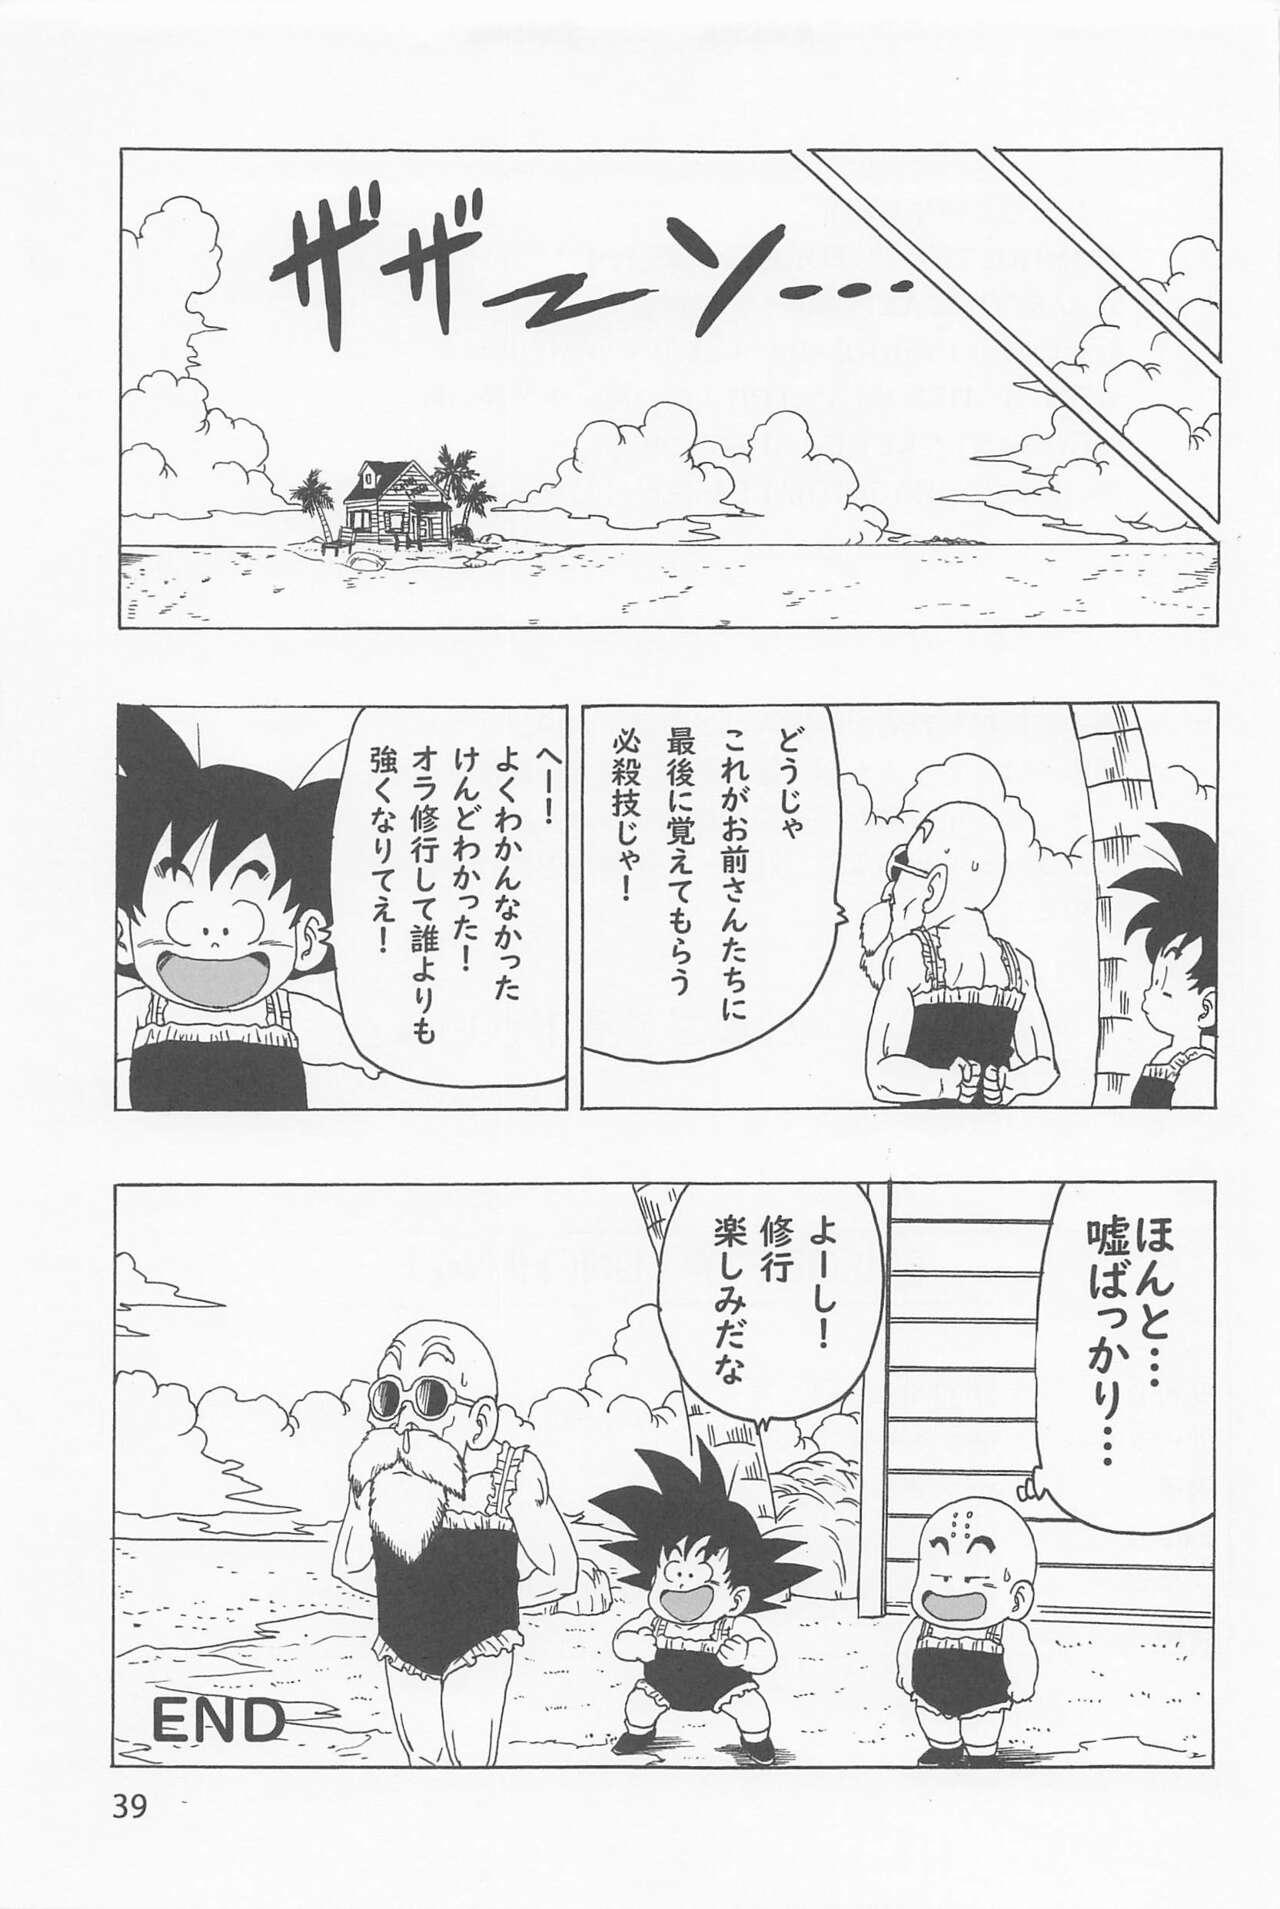 Blowjob Episode of Lunch 1 - Dragon ball Peruana - Page 40